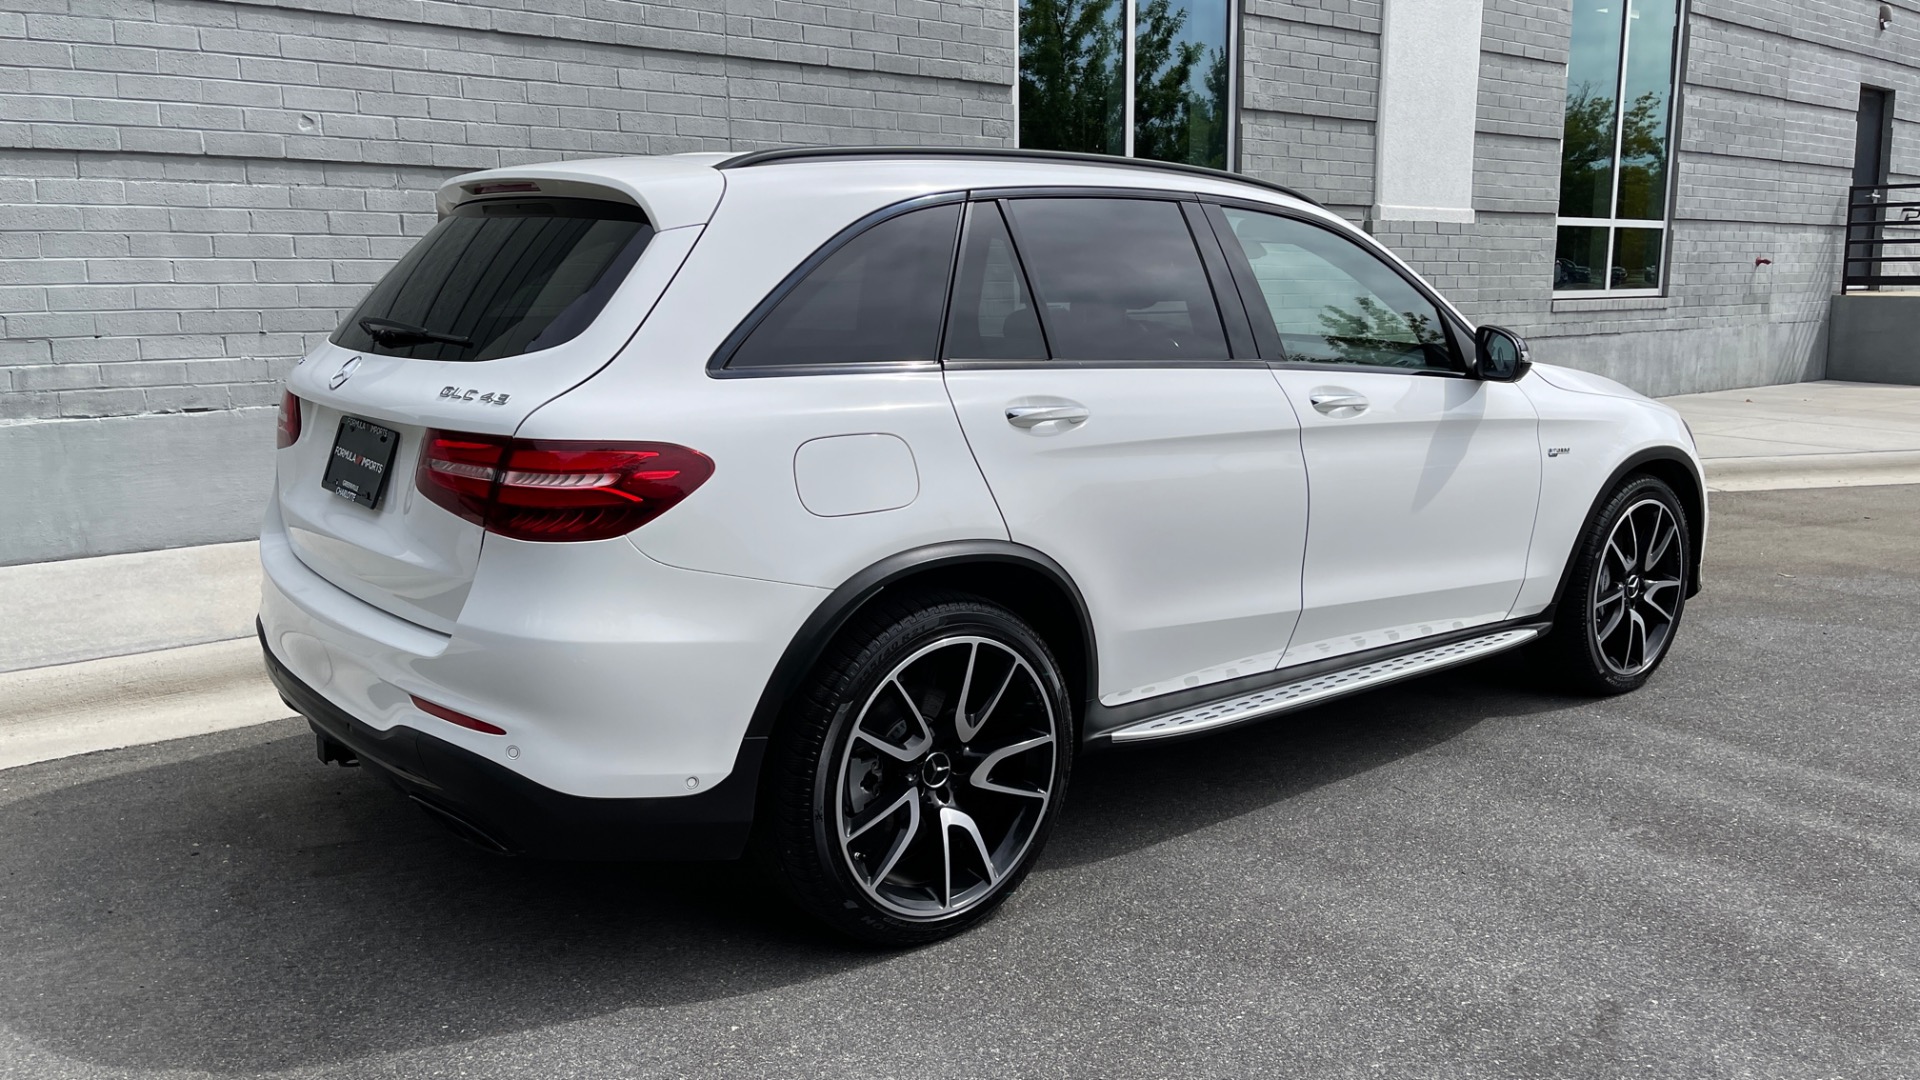 Used 2019 Mercedes-Benz GLC AMG GLC 43 / AMG BLACKOUT / 21IN WHEELS / AMG EXHAUST / EXTERIOR LIGHTING for sale $48,999 at Formula Imports in Charlotte NC 28227 7